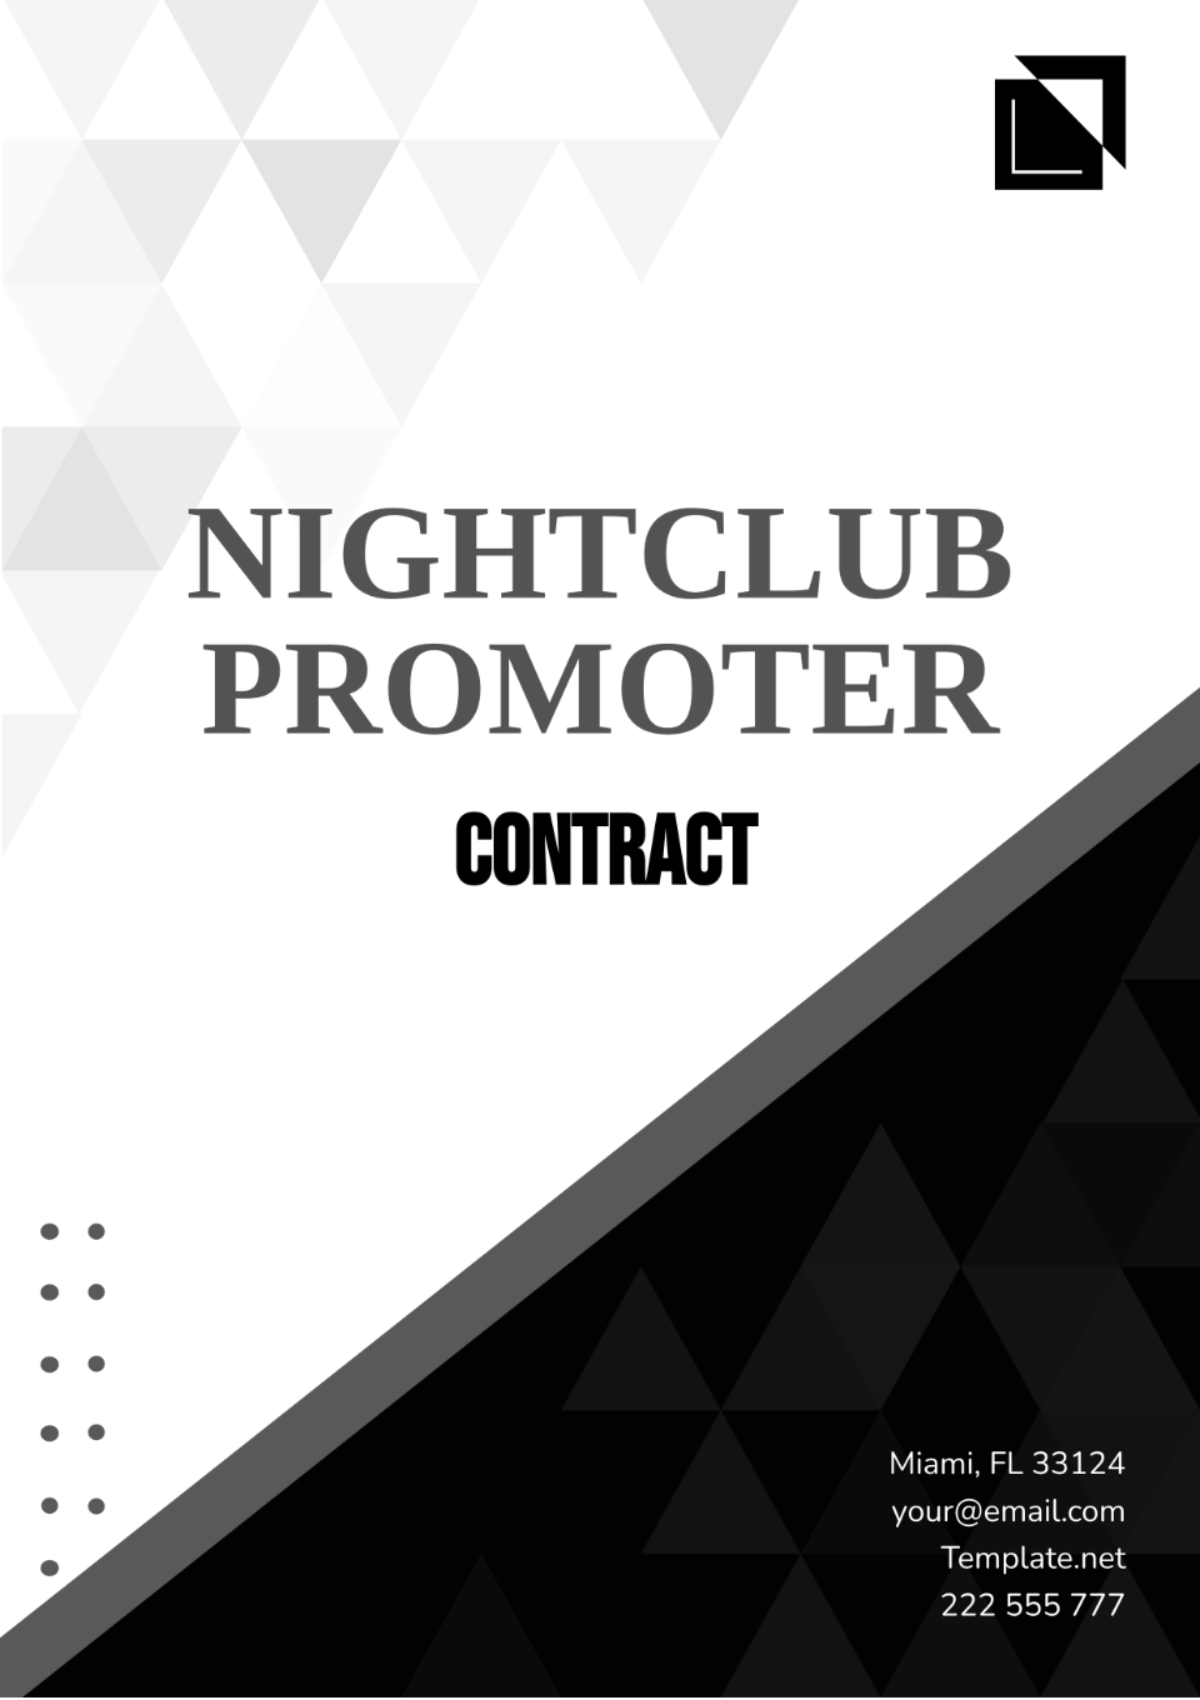 Nightclub Promoter Contract Template